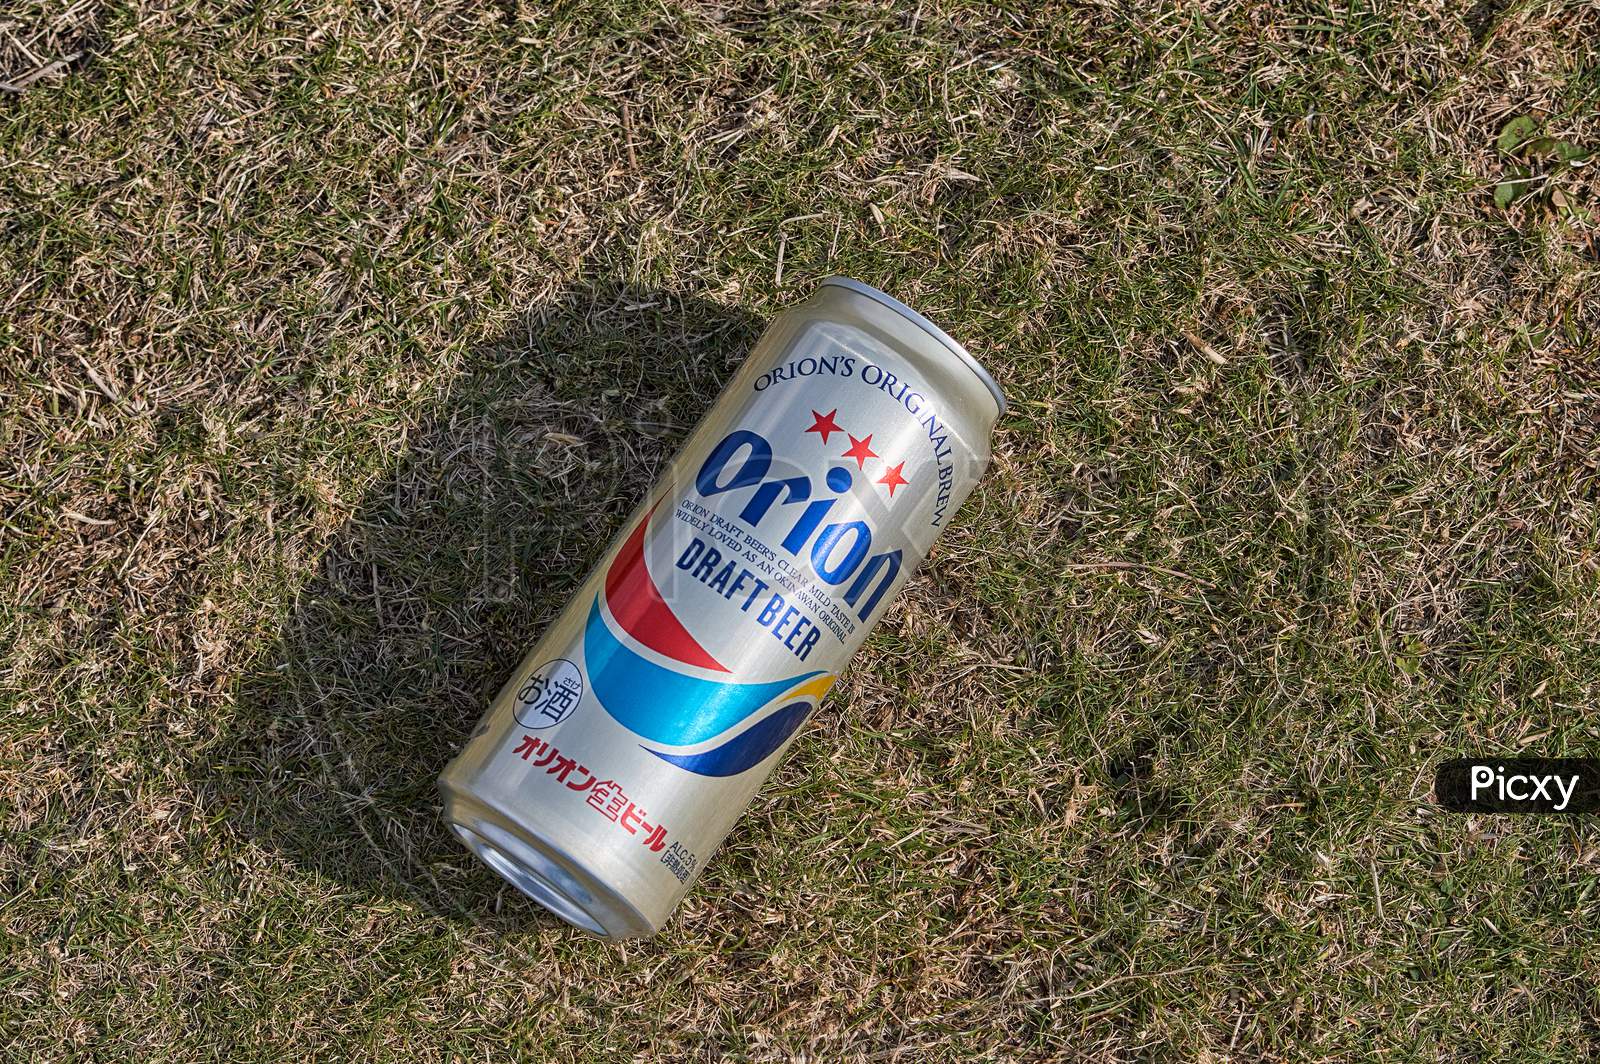 Can Of Orion Beer, Popular Okinawa Beer, Laying On A Lawn